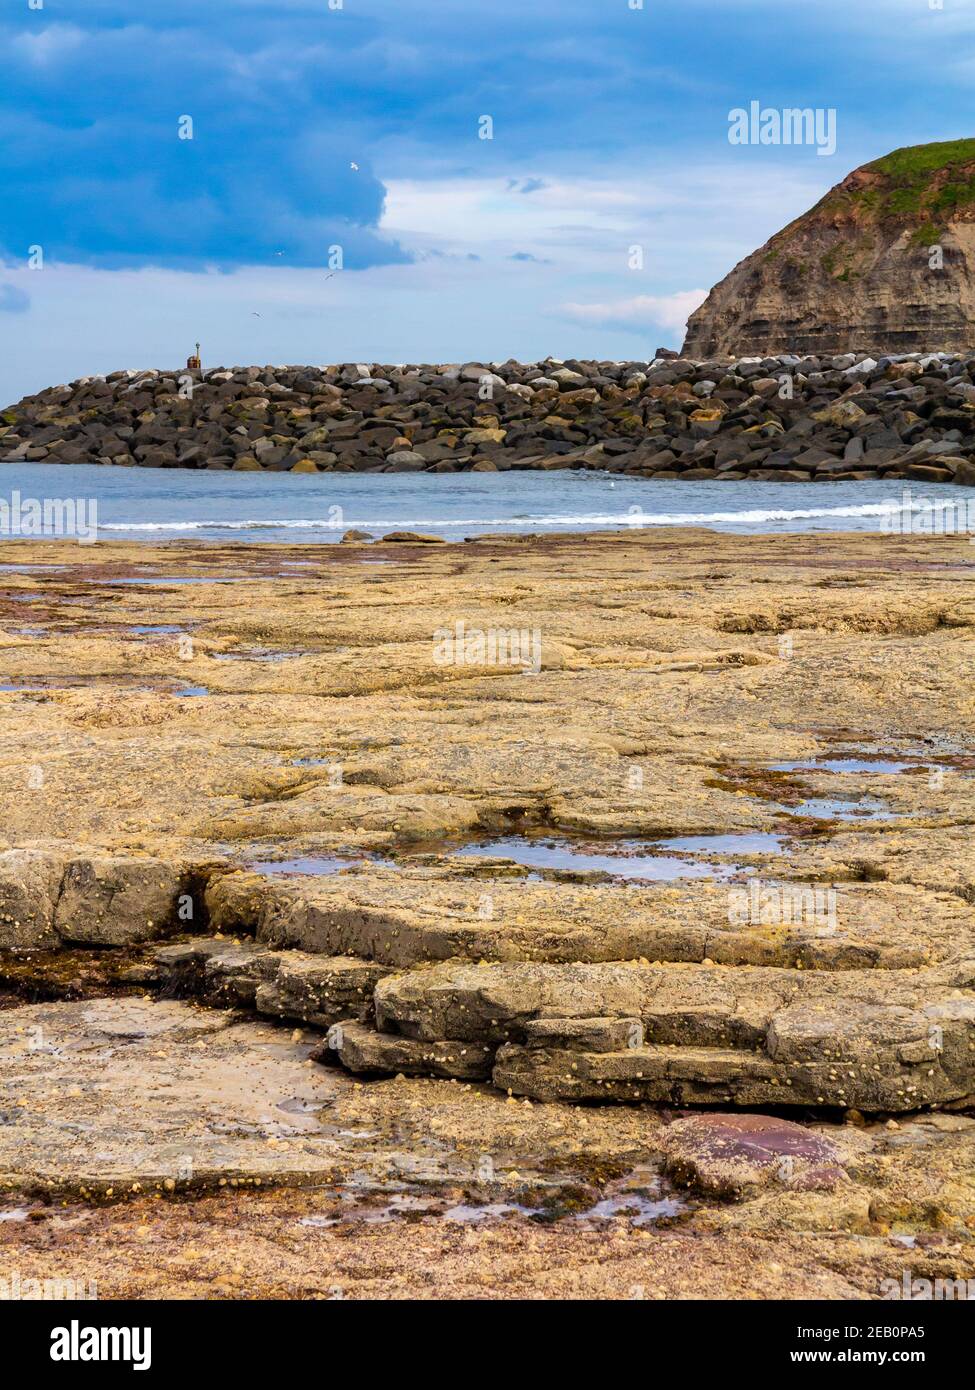 Rock pools on the beach at Staithes a village on the North Yorkshire coast in north eastern England UK Stock Photo